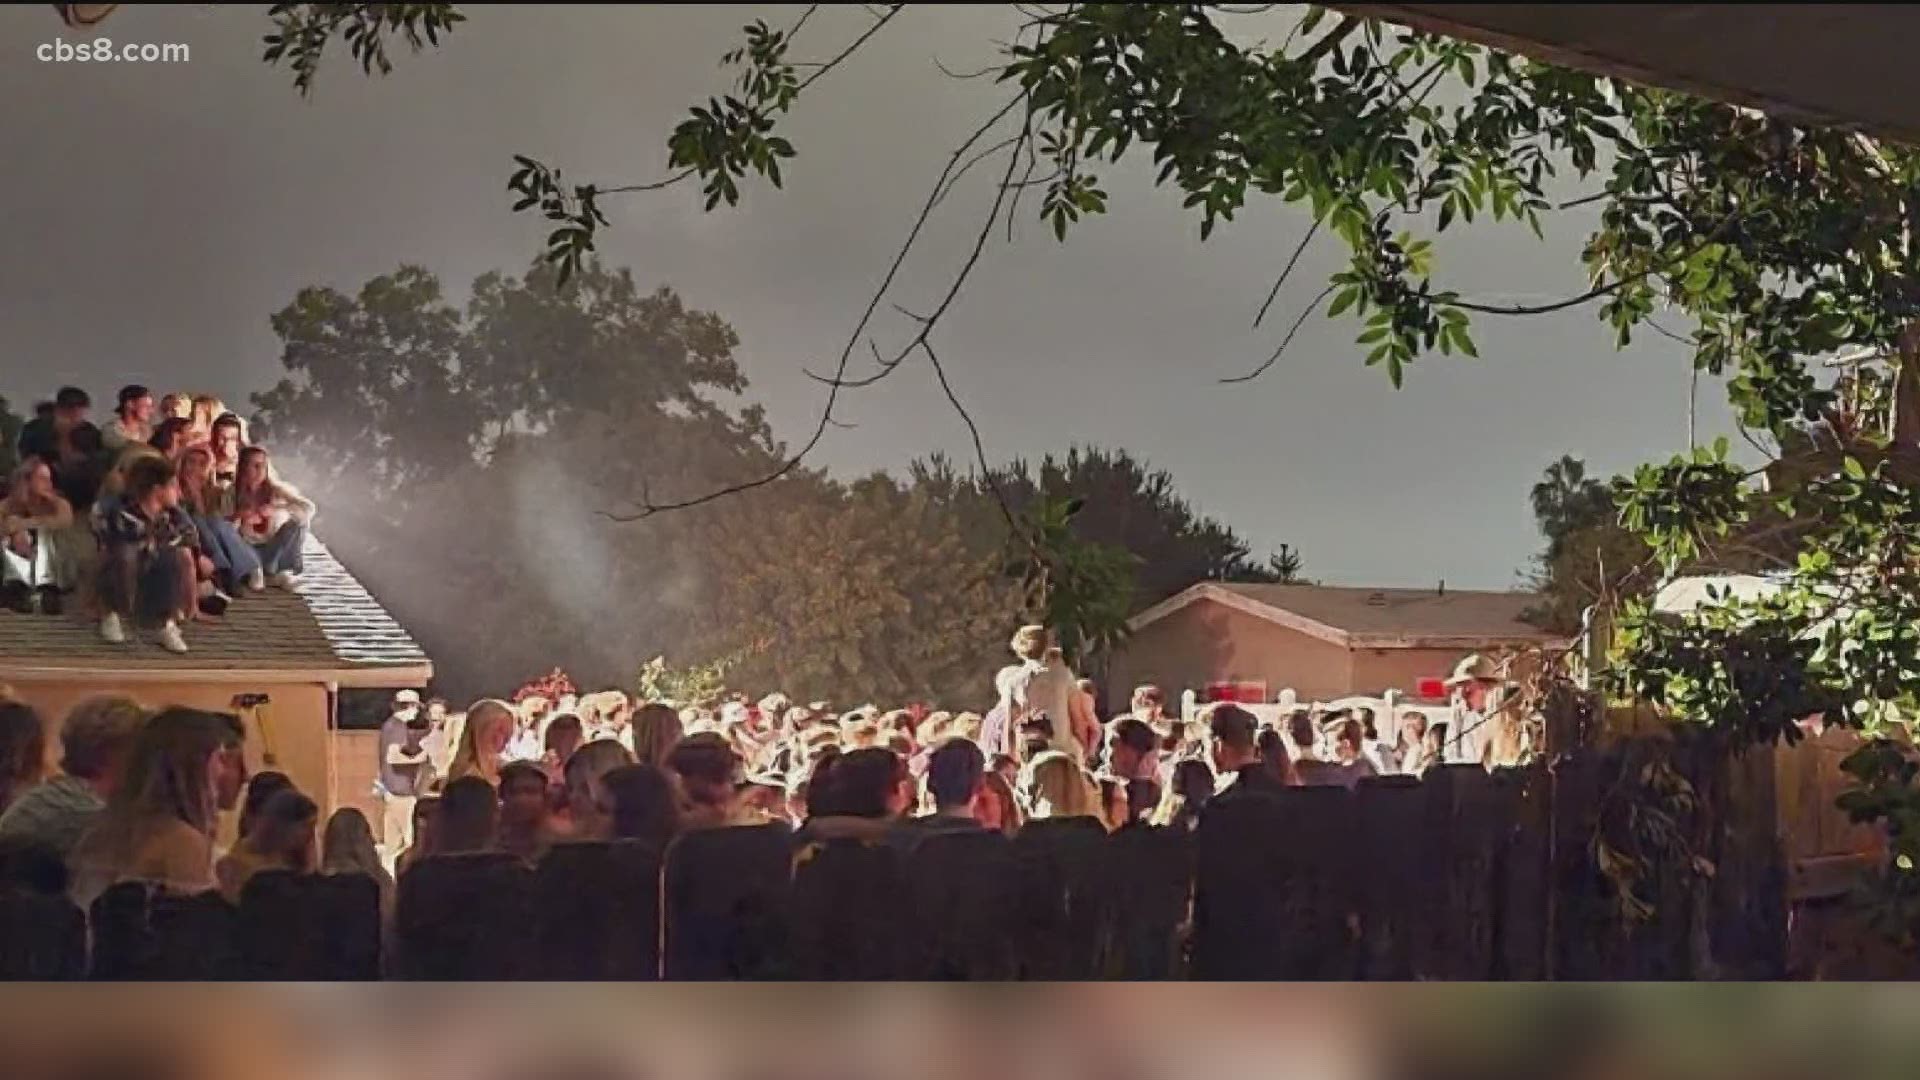 "They were on the roof... there were probably 100 people in that backyard." Parties and gatherings around San Diego State University have neighbors concerned.